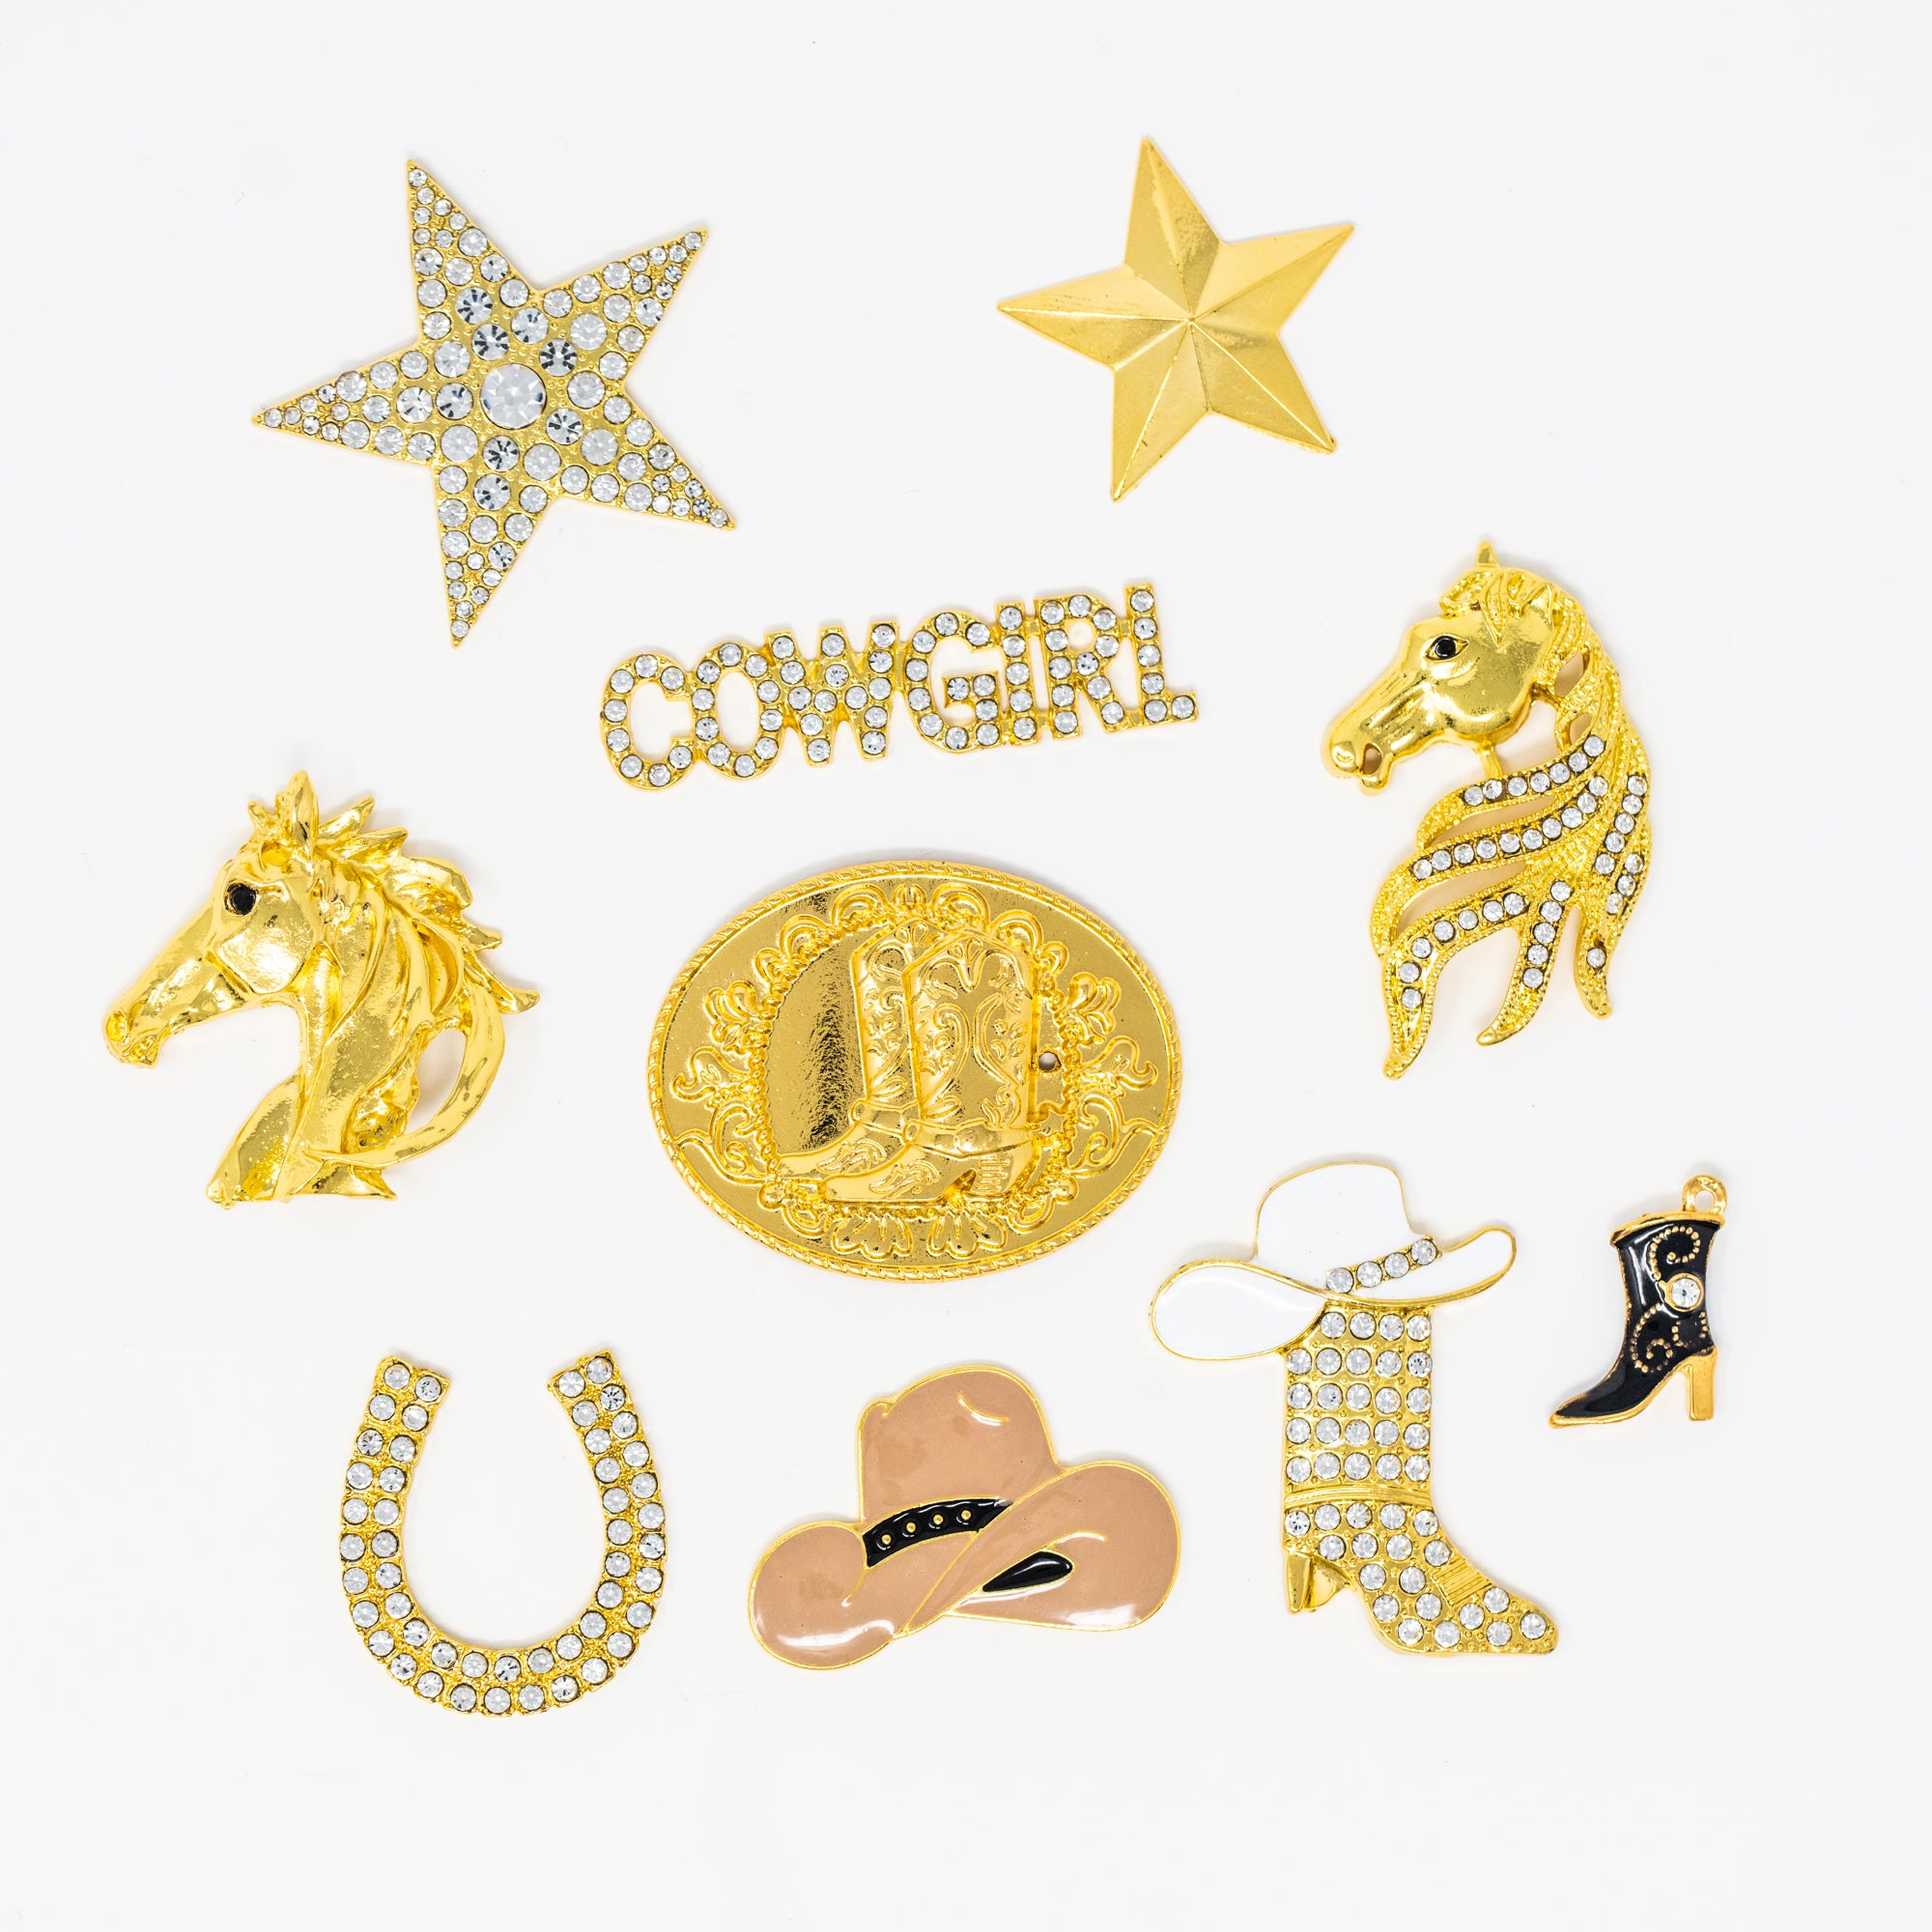 Rhinestone Cowgirl Country Western Embellishments for crafts sparkle boots hats and horses